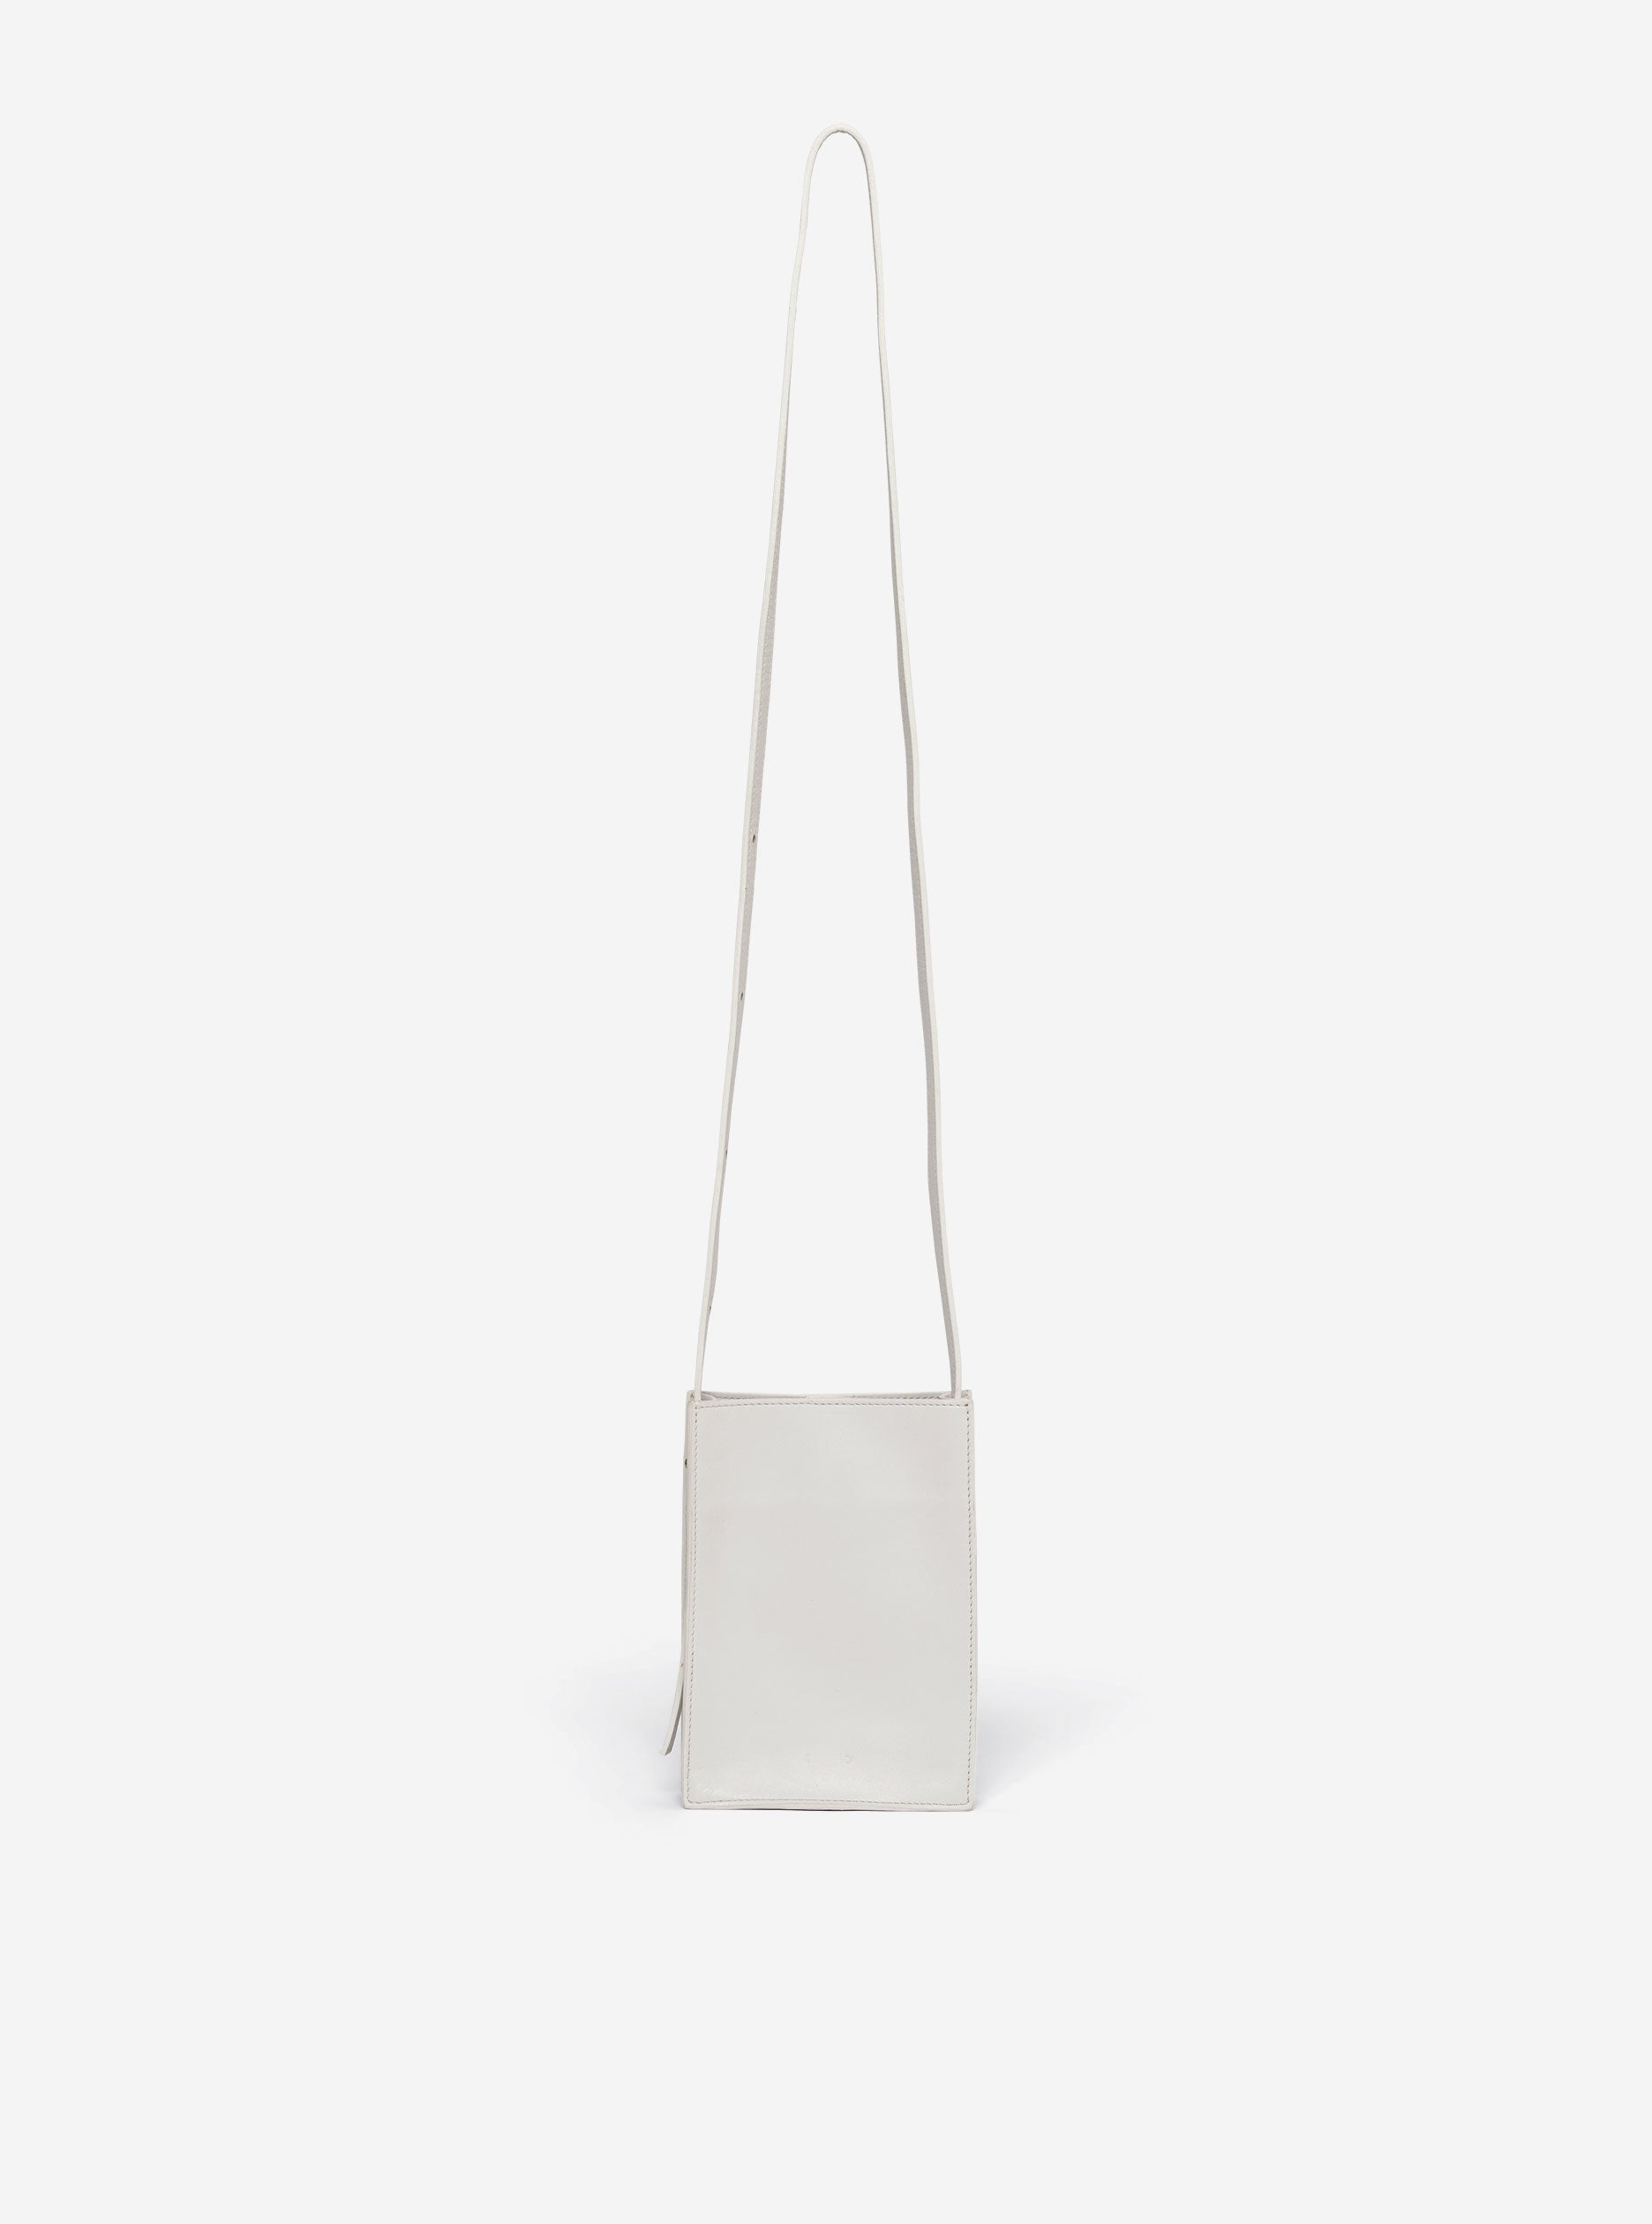 PB 0110 - leather bags & accessories by Philipp Bree